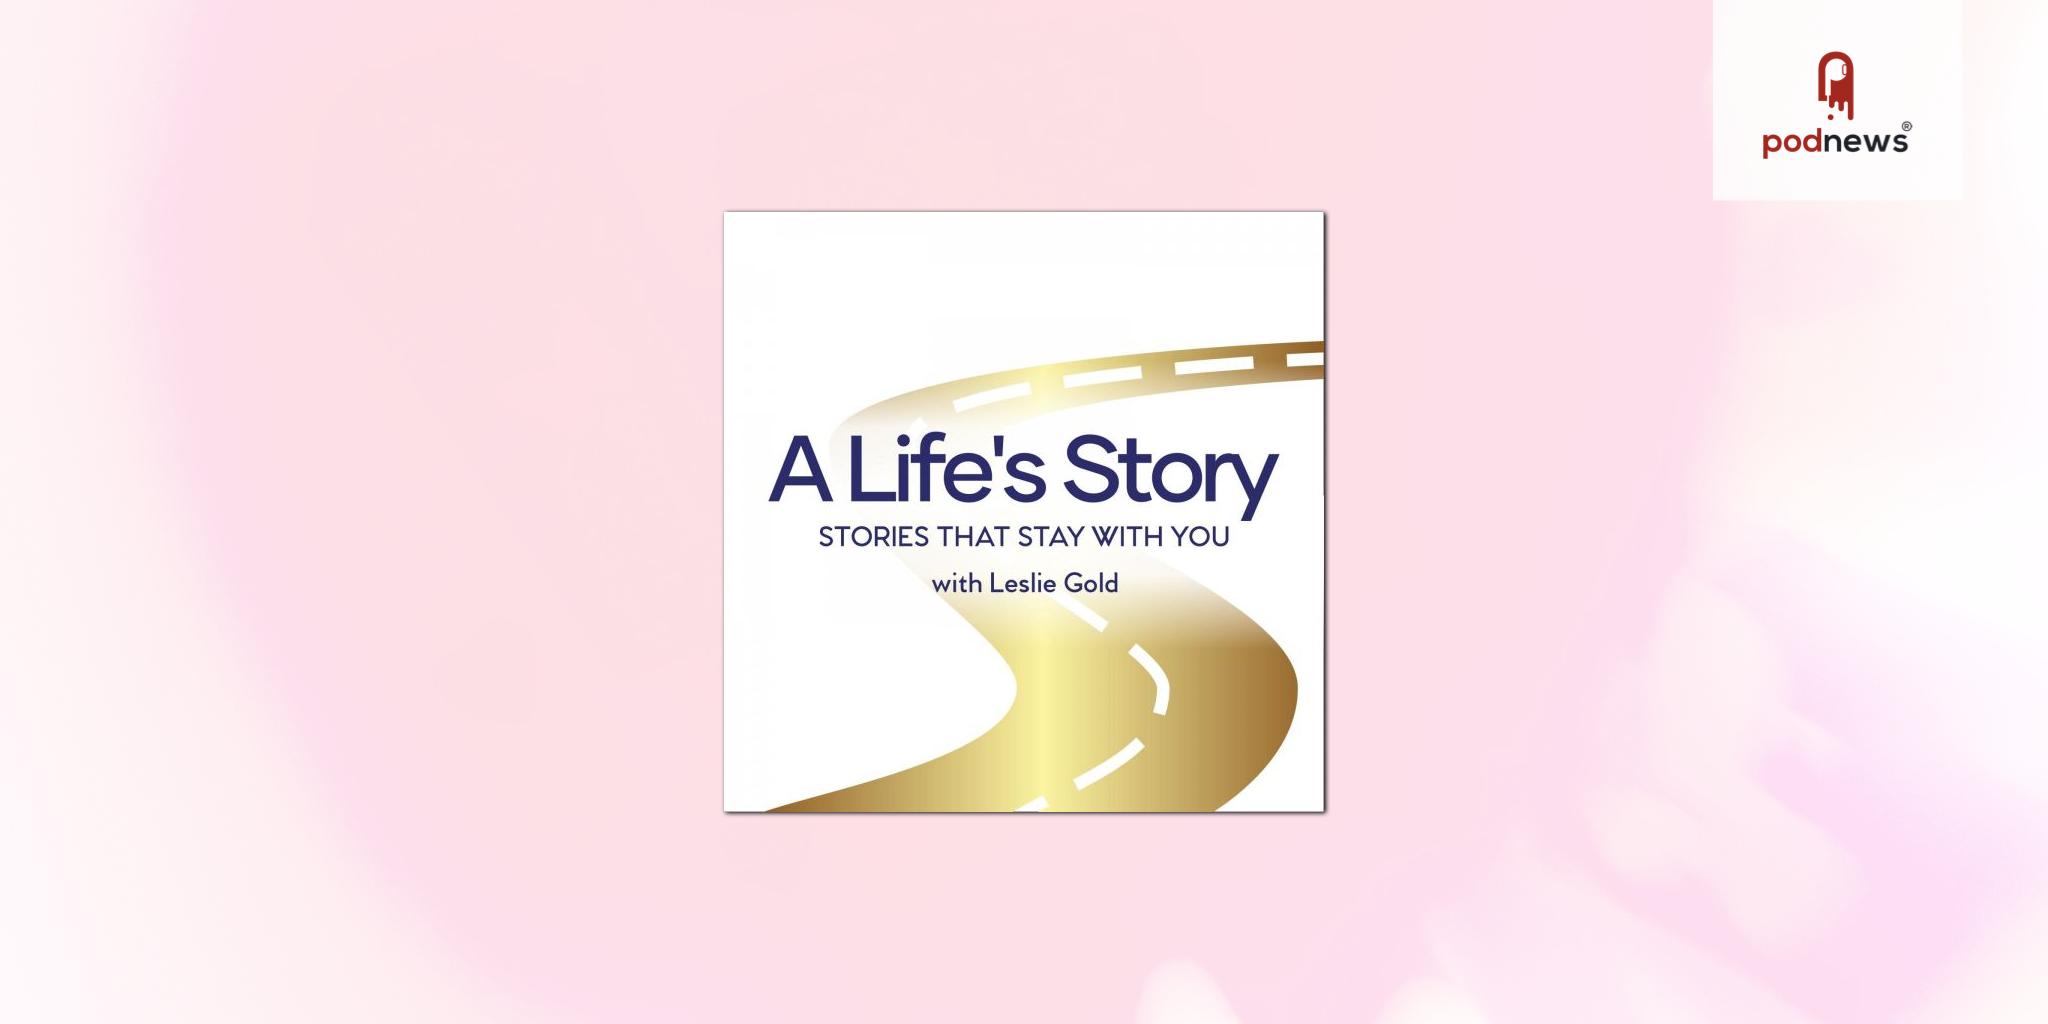 A Life’s Story Podcast tells the compelling stories of people who have seen it all